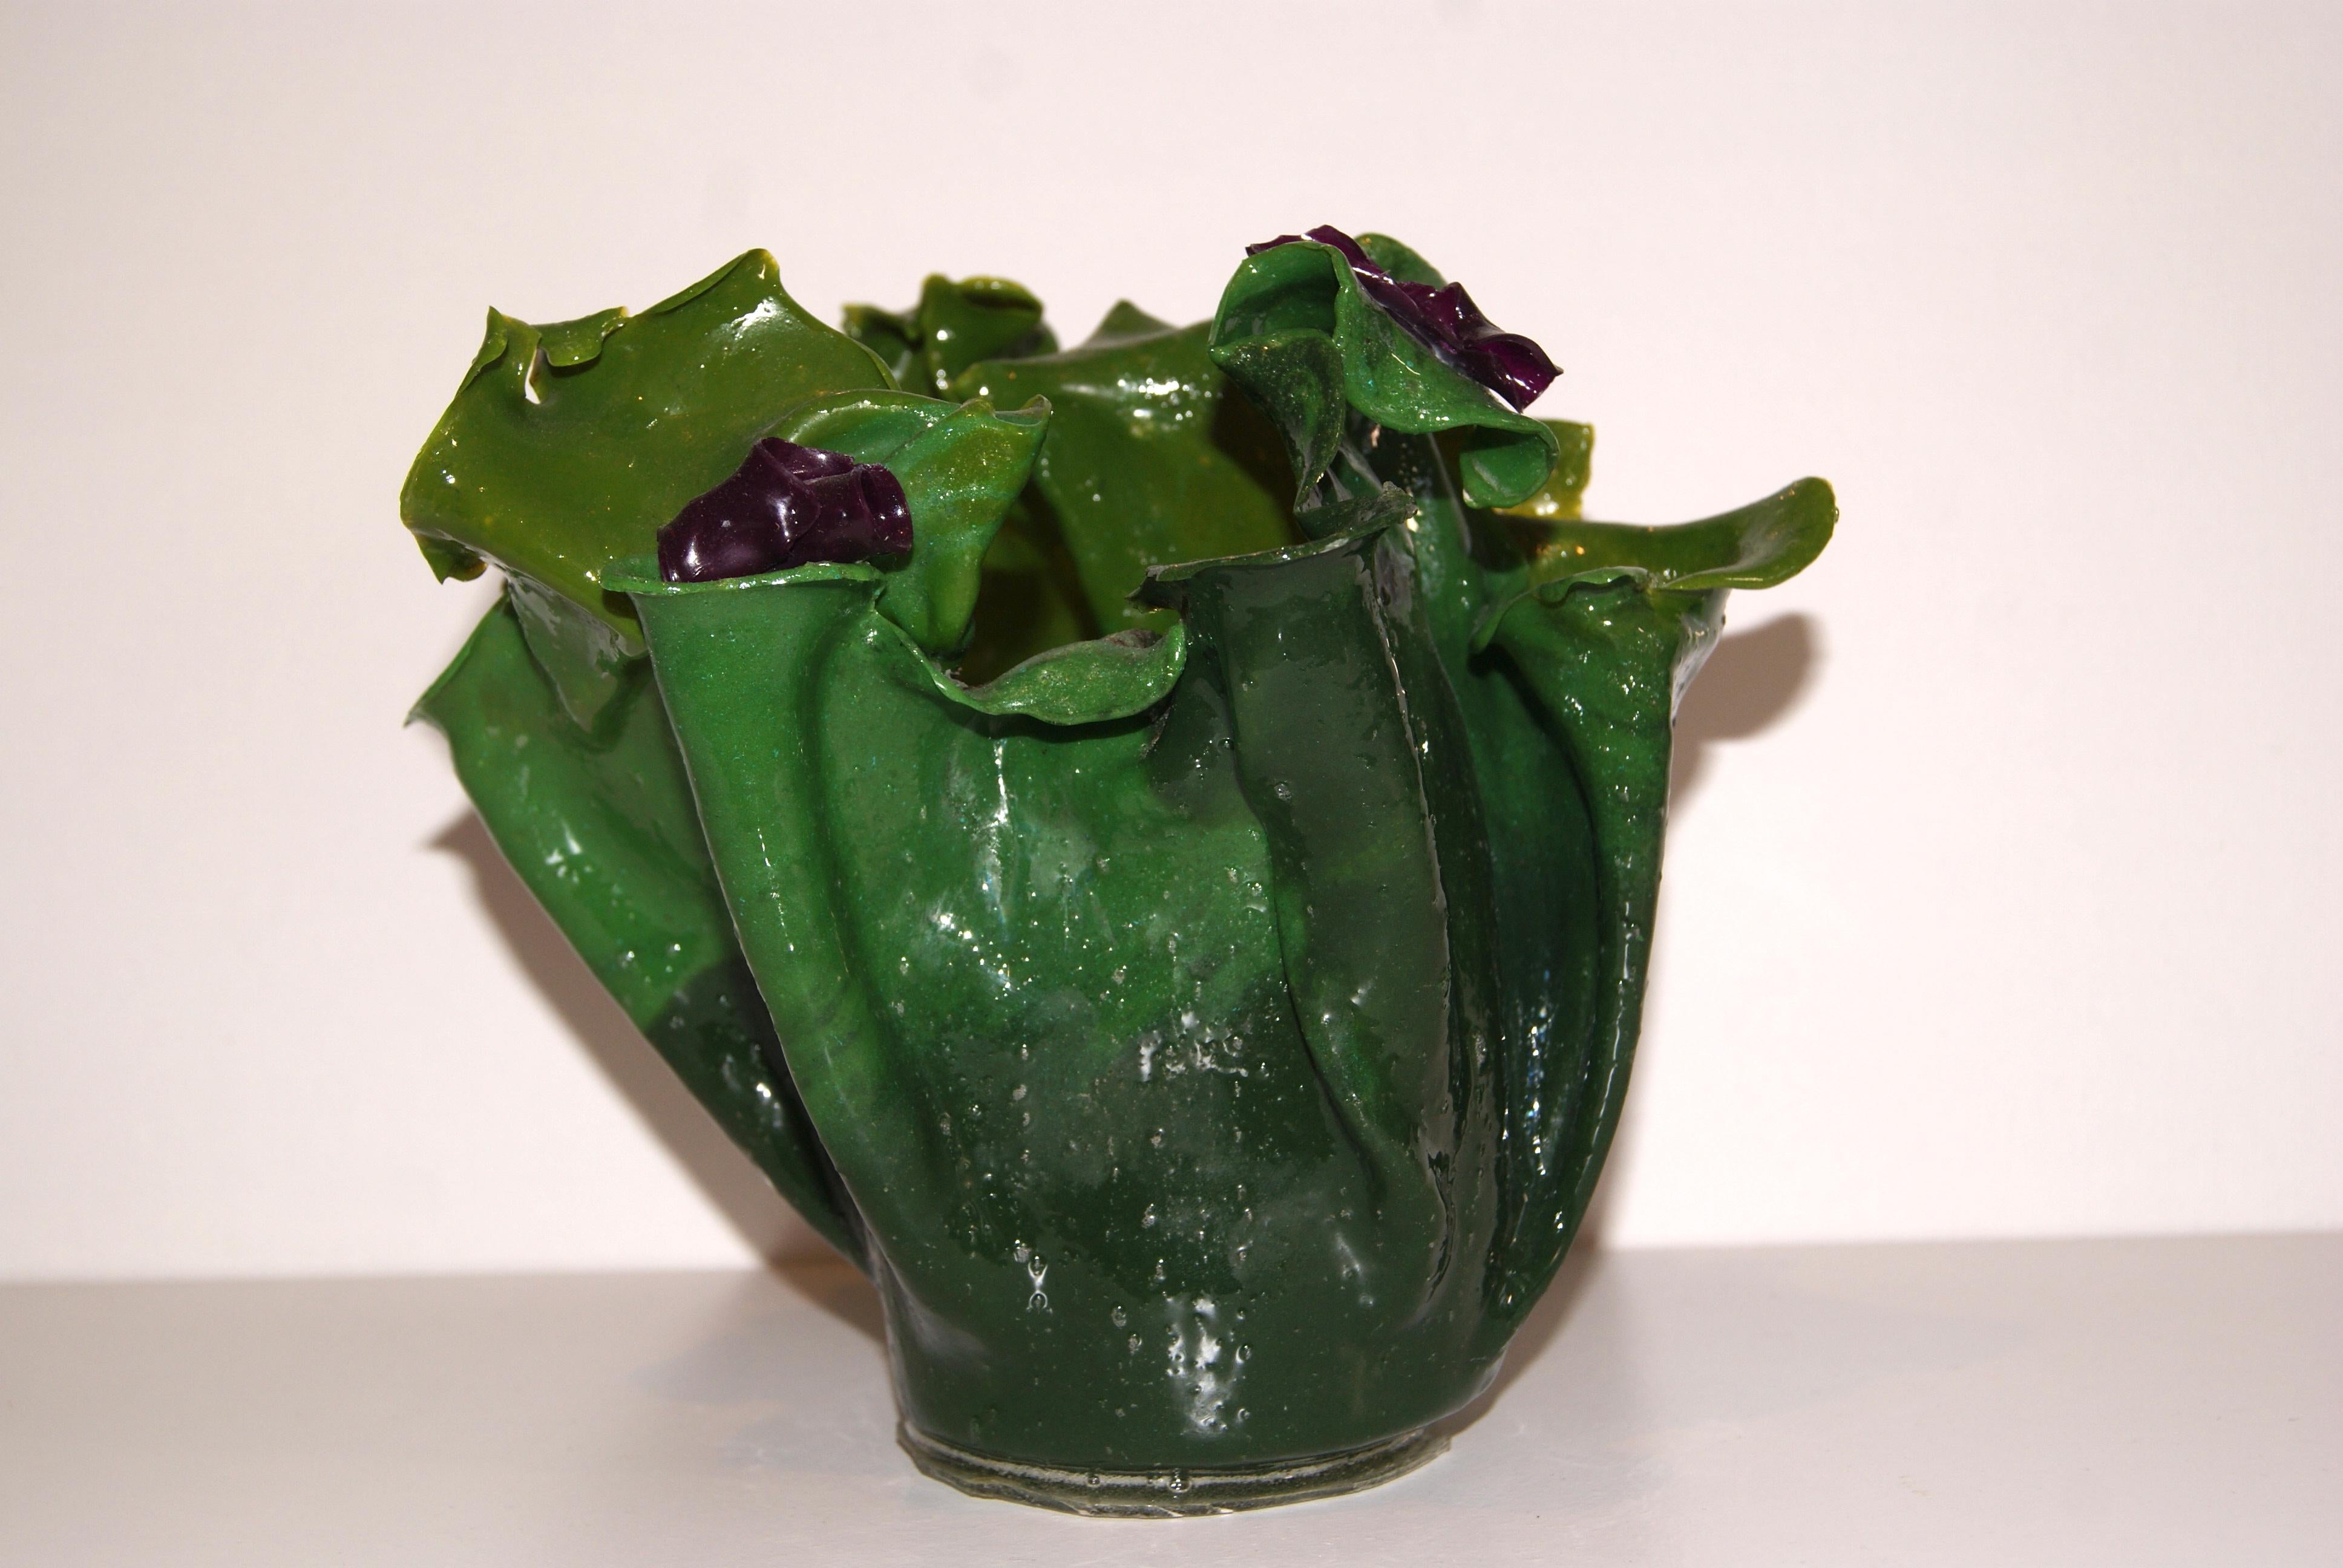 Sculptural resin vase in shades of green with touches of purple.